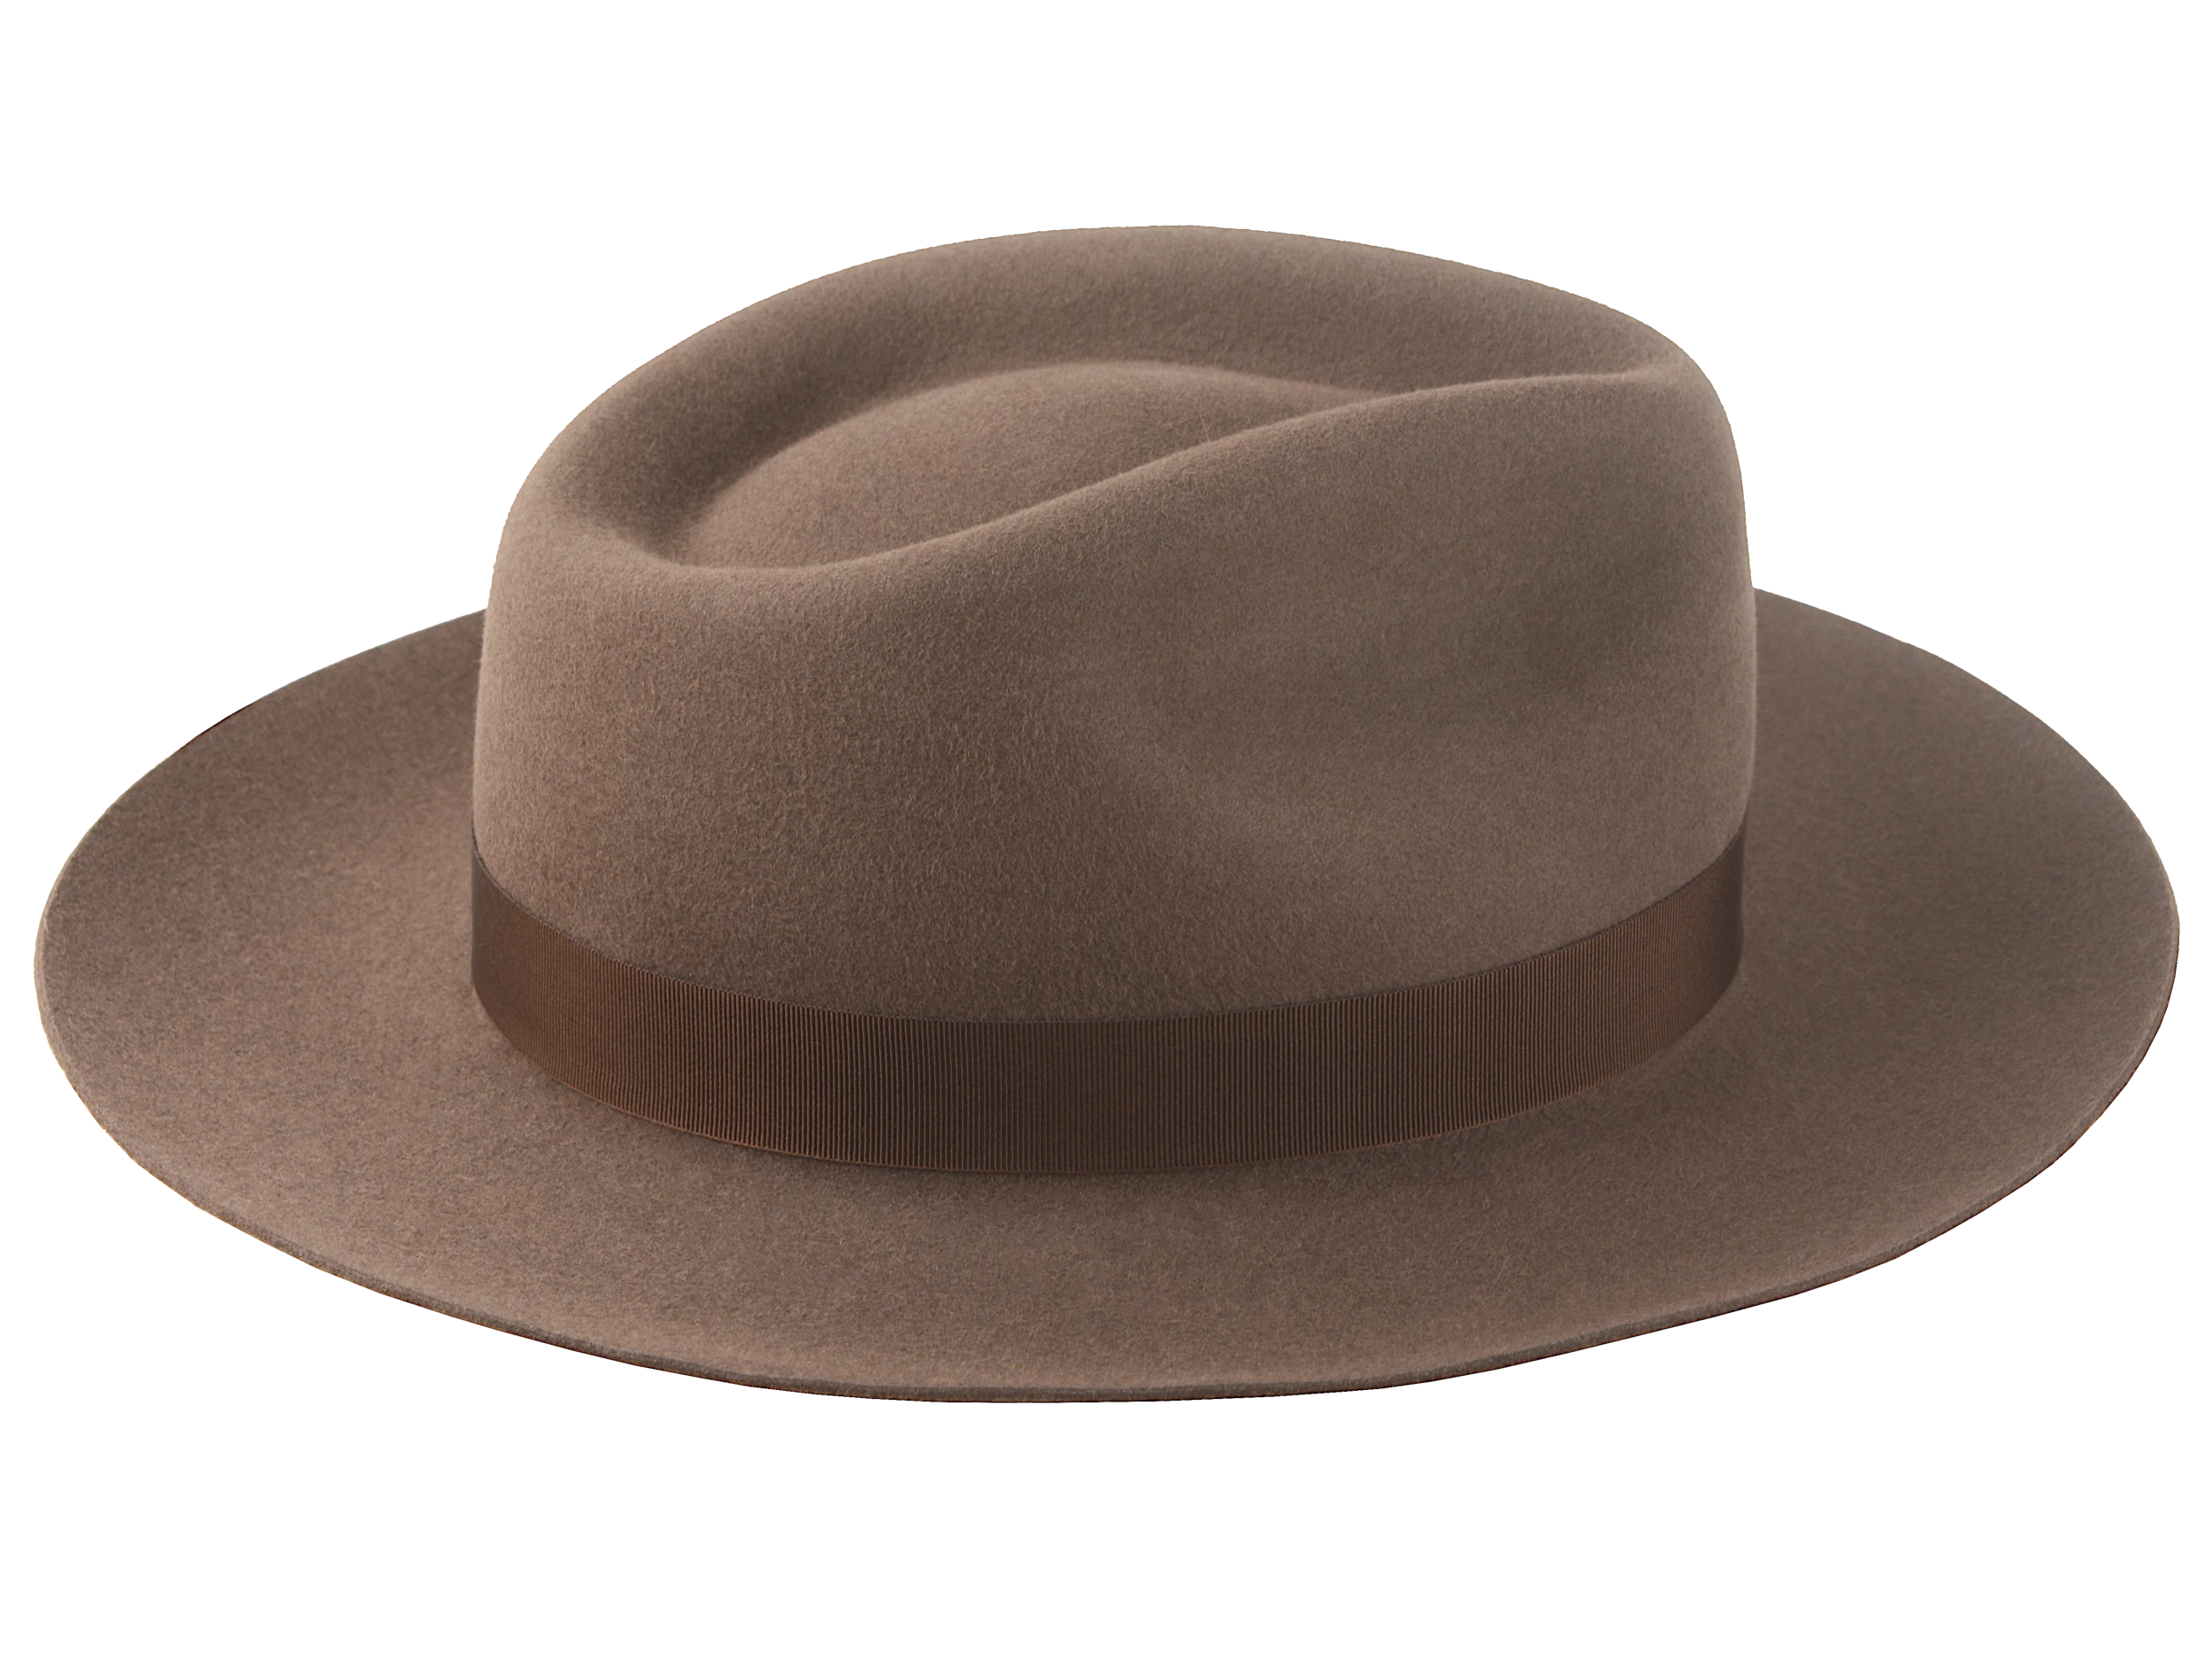 The Pathfinder: Detailed view highlighting the raw-edge snap brim | Agnoulita Hats